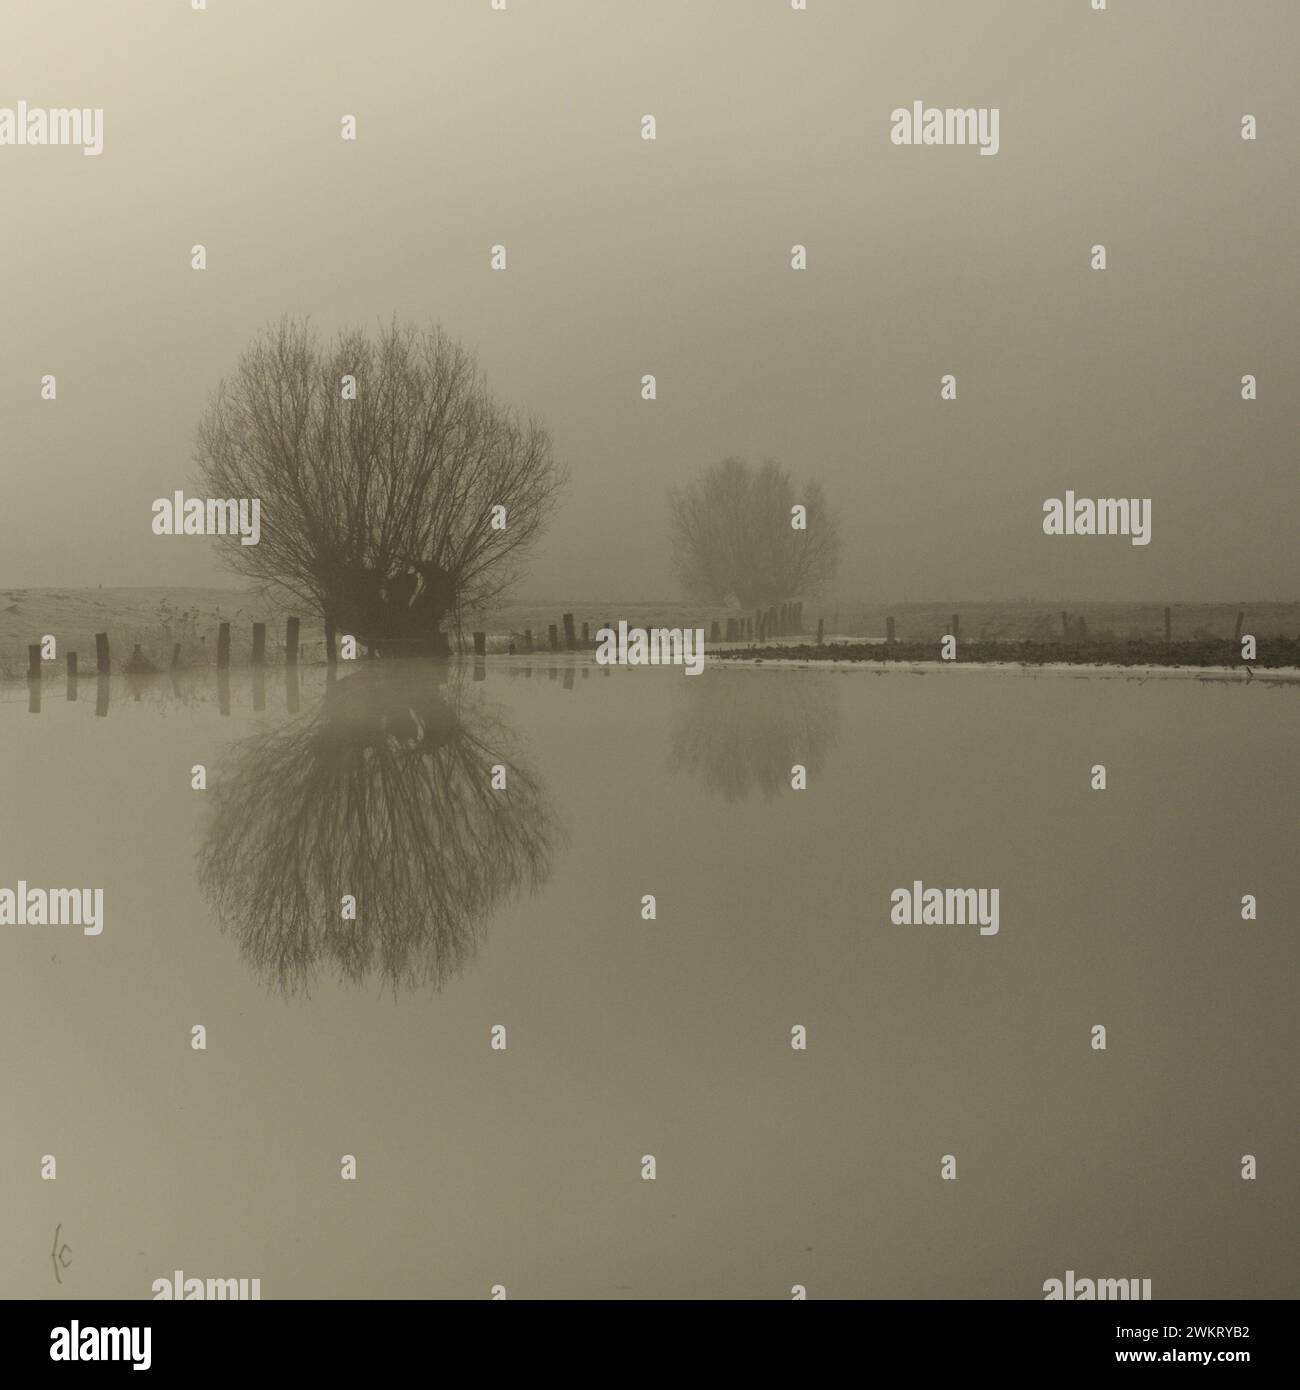 Flooded fields with pollard trees on a typical misty winter morning at Lower Rhine, North Rhine-Westphalia, Germany. Stock Photo